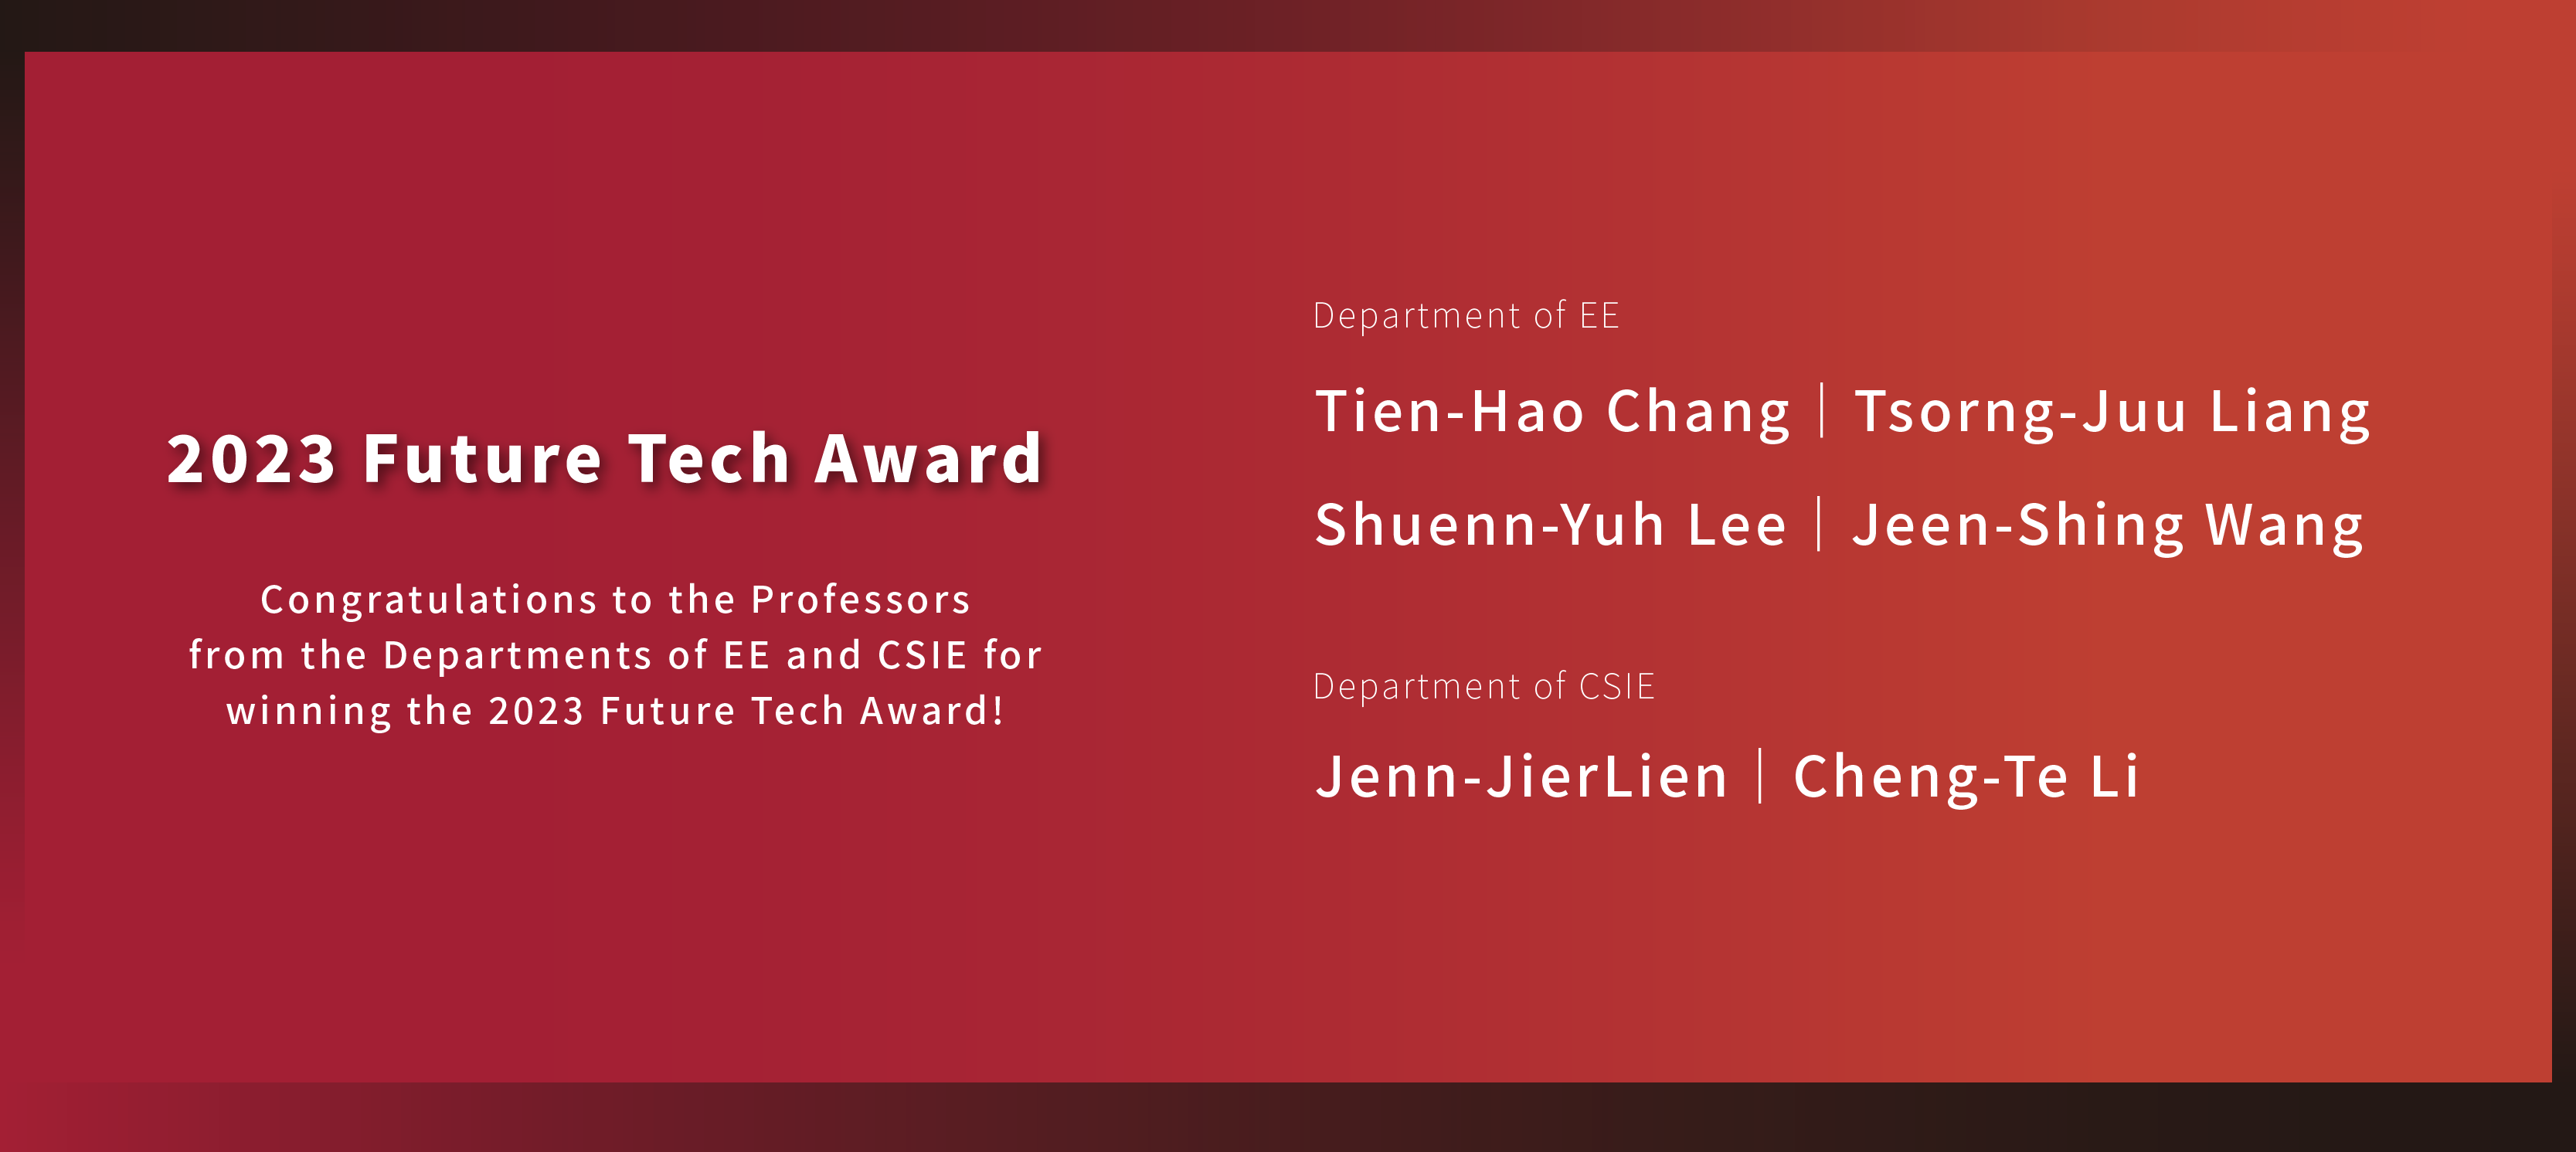 Congratulations to the Professors from the Departments of EE and CSIE for winning the 2023 FutureTech Award!